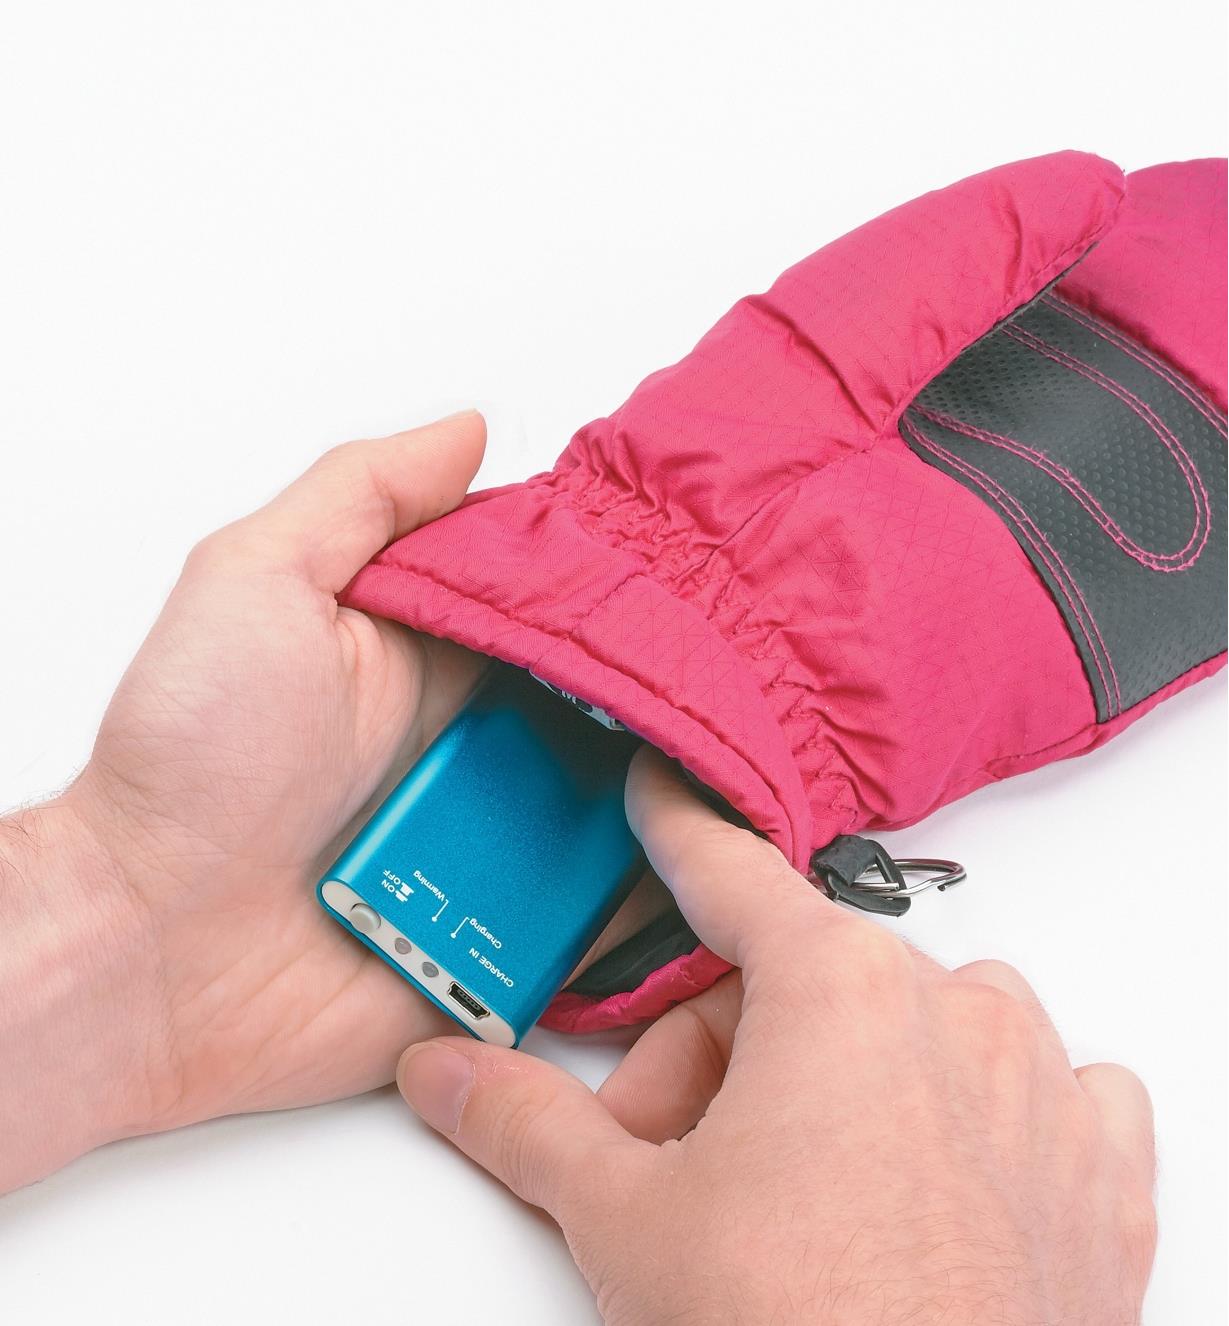 Placing the Rechargeable Handwarmer inside a mitten